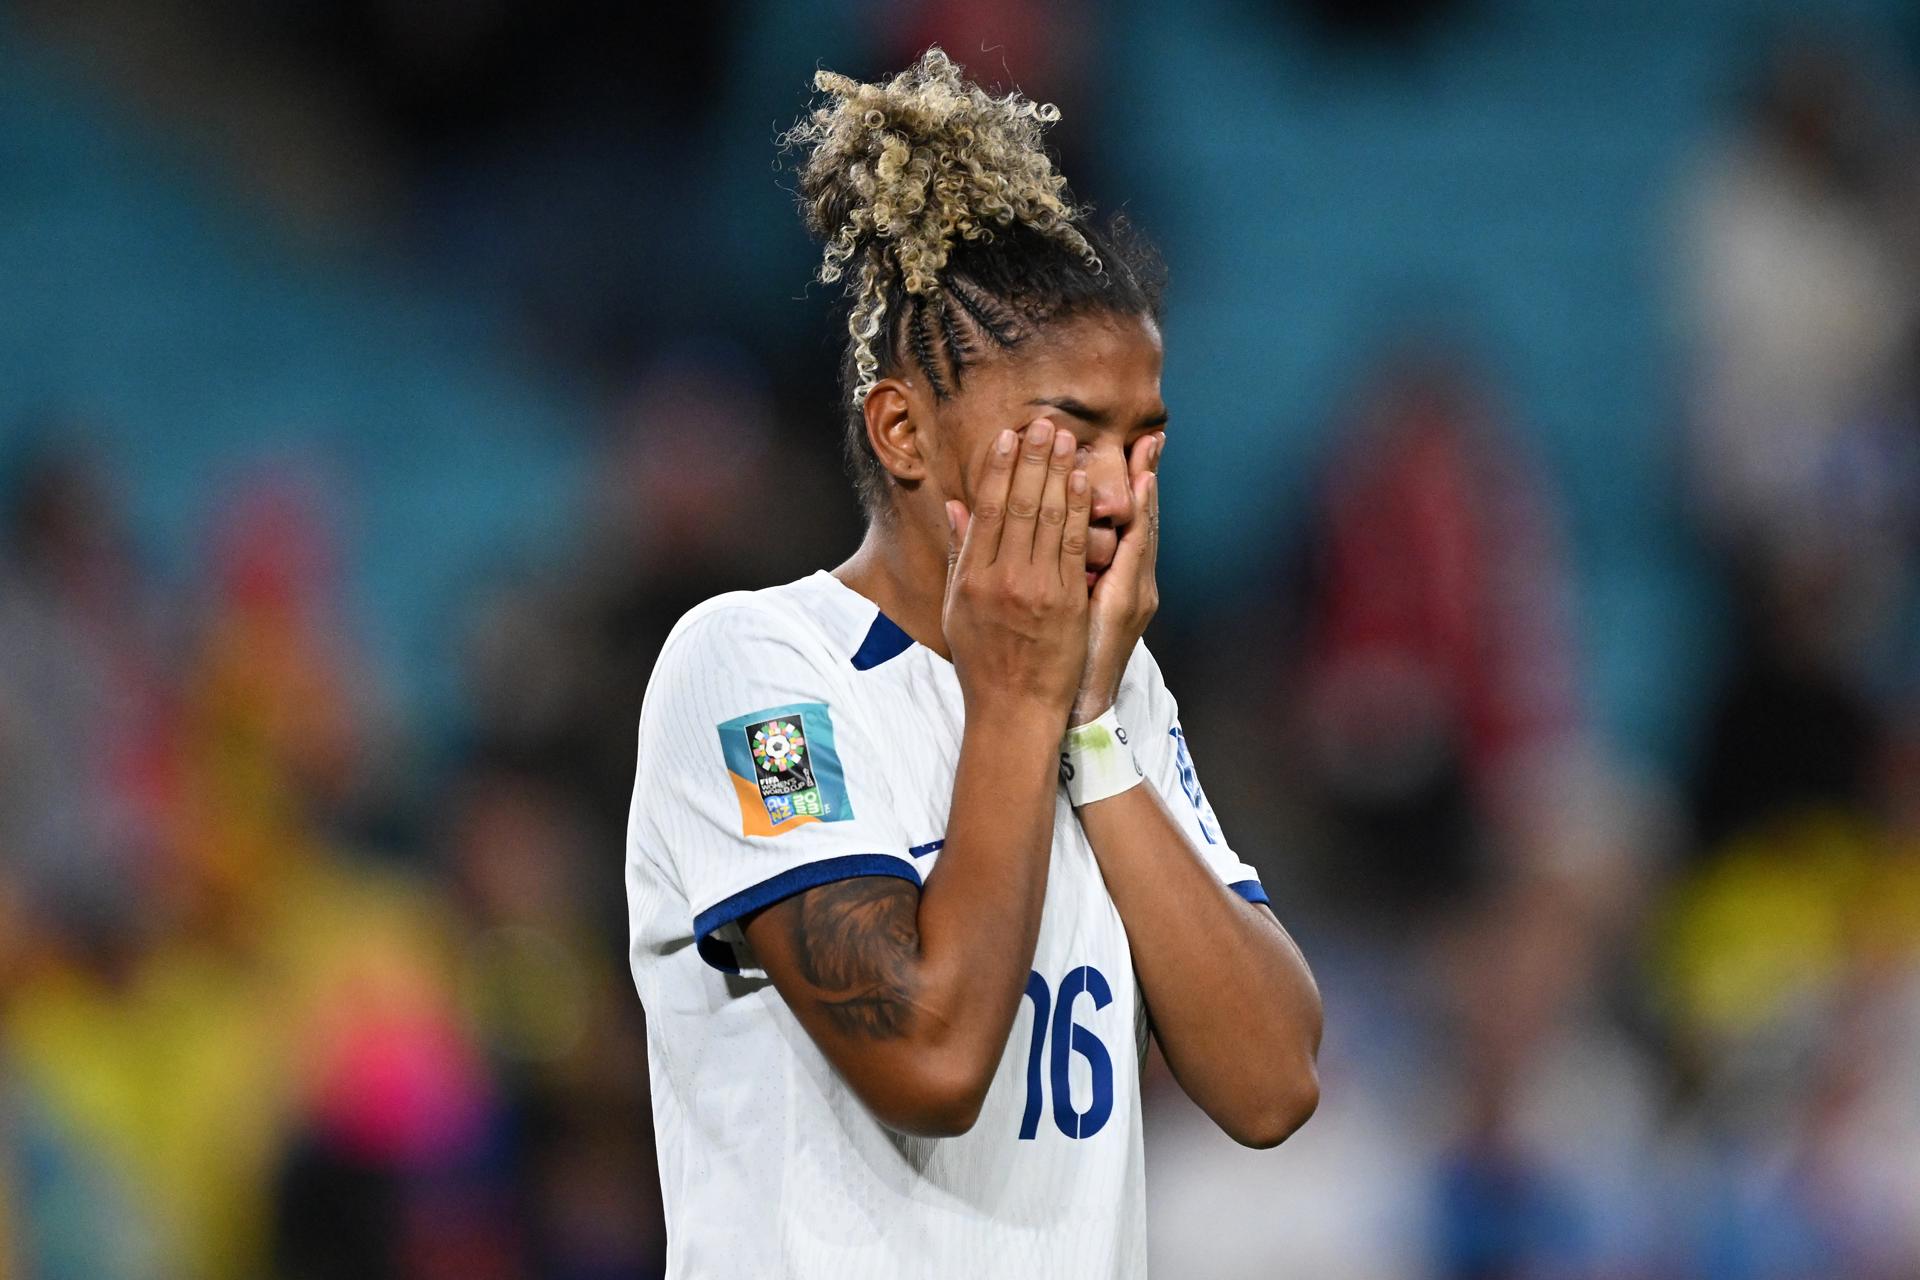 Defender Jorelyn Carabali shows her disappointment after Colombia lost 2-1 in a hard-fought quarterfinal match against England on 12 August 2023 at the FIFA Women's World Cup at Stadium Australia in Sydney. EFE/EPA/DEAN LEWINS
